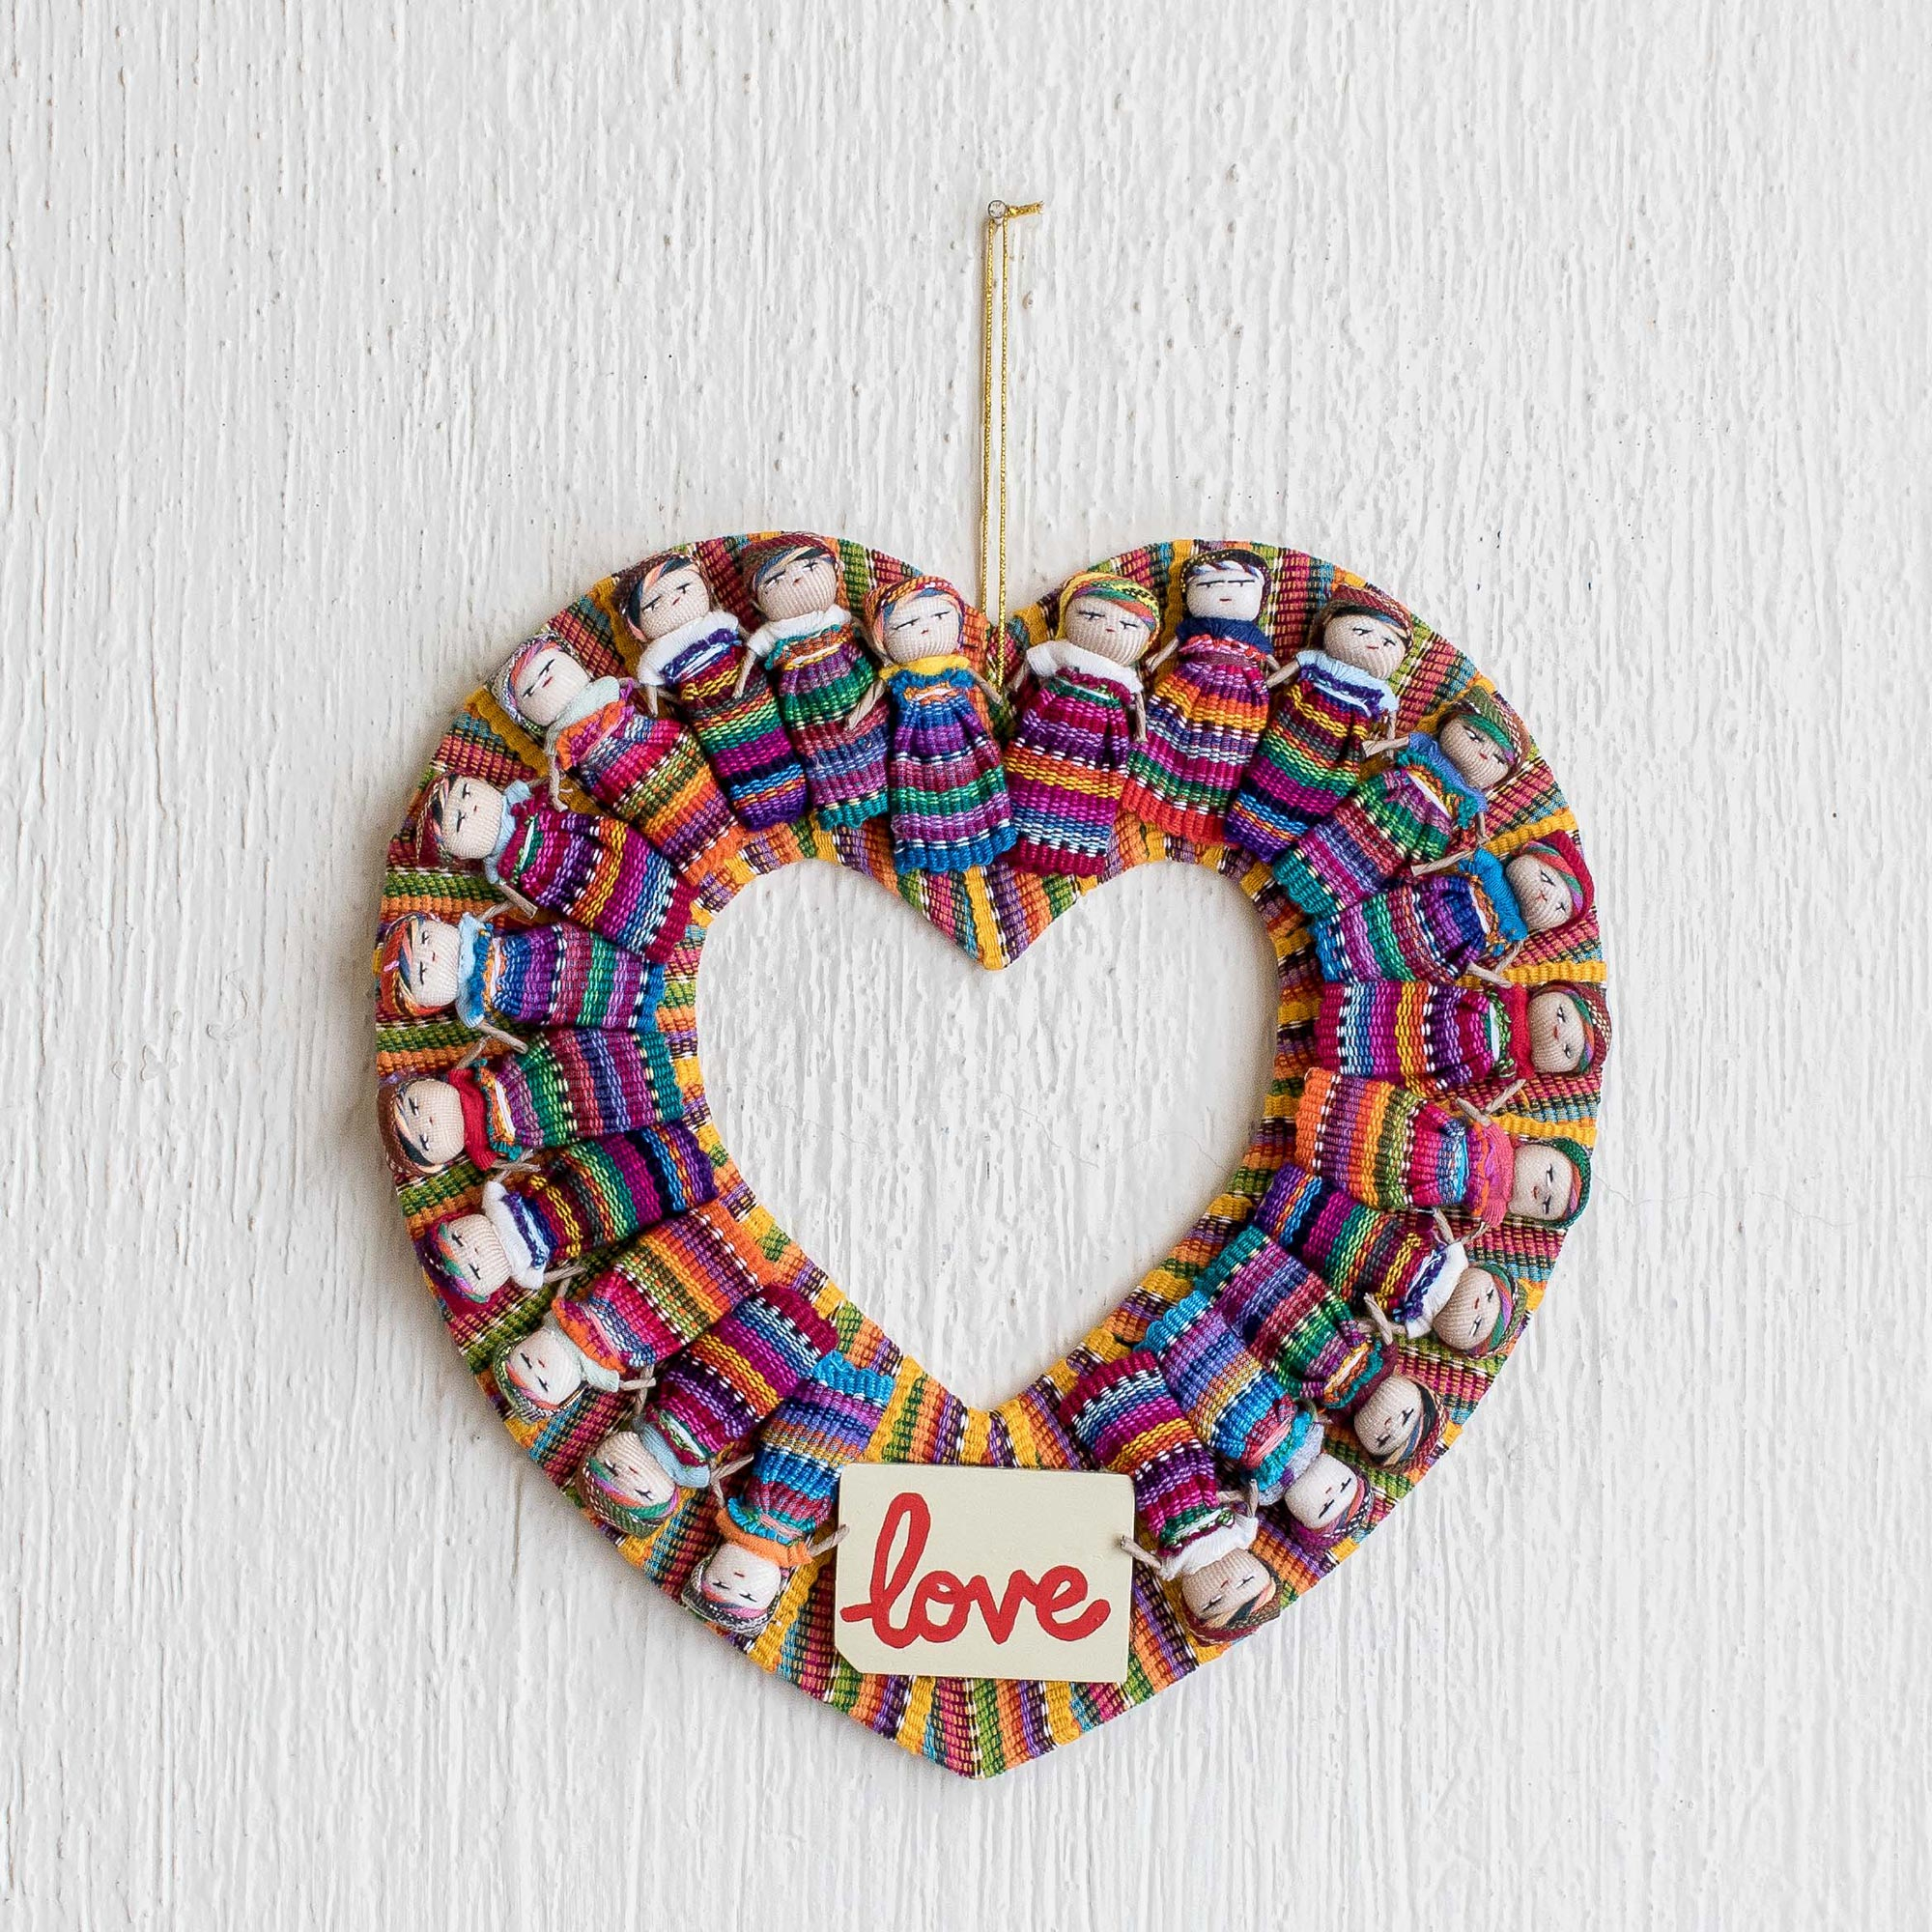 Hand-Loomed Cotton Worry Doll Heart Wreath From Guatemala, 'Amor